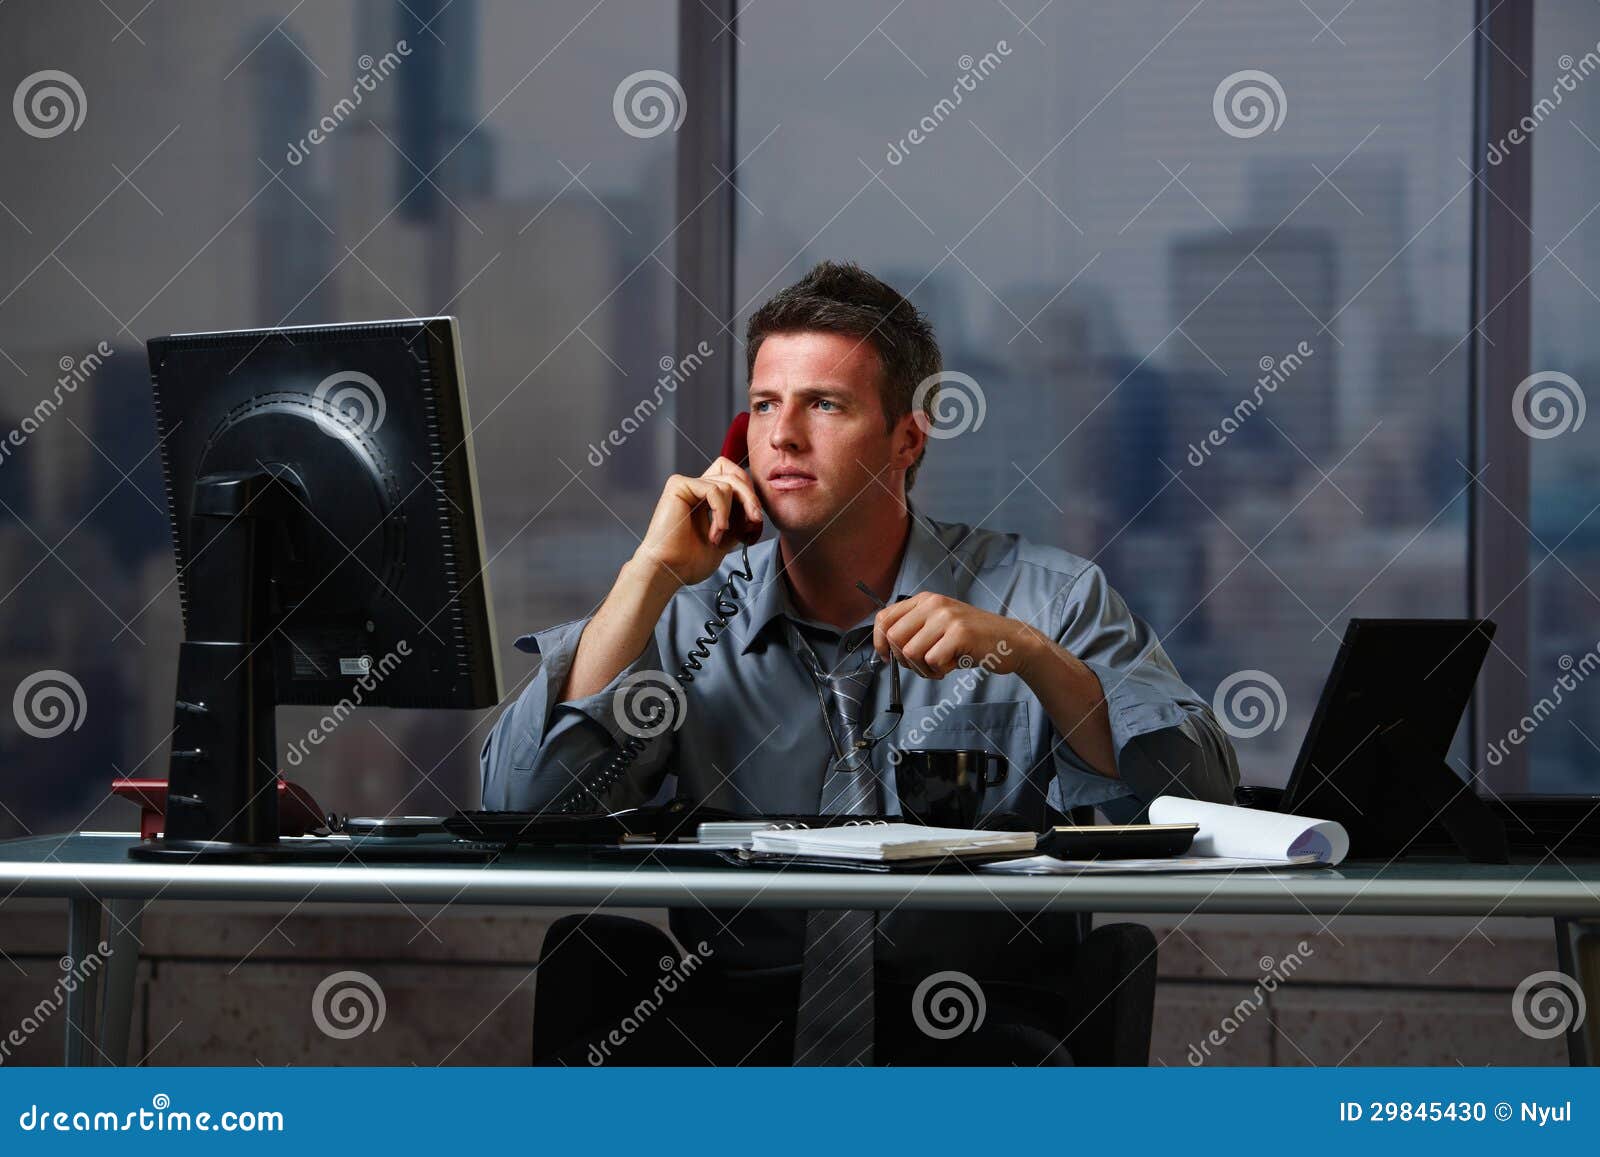 businessman on call working overtime